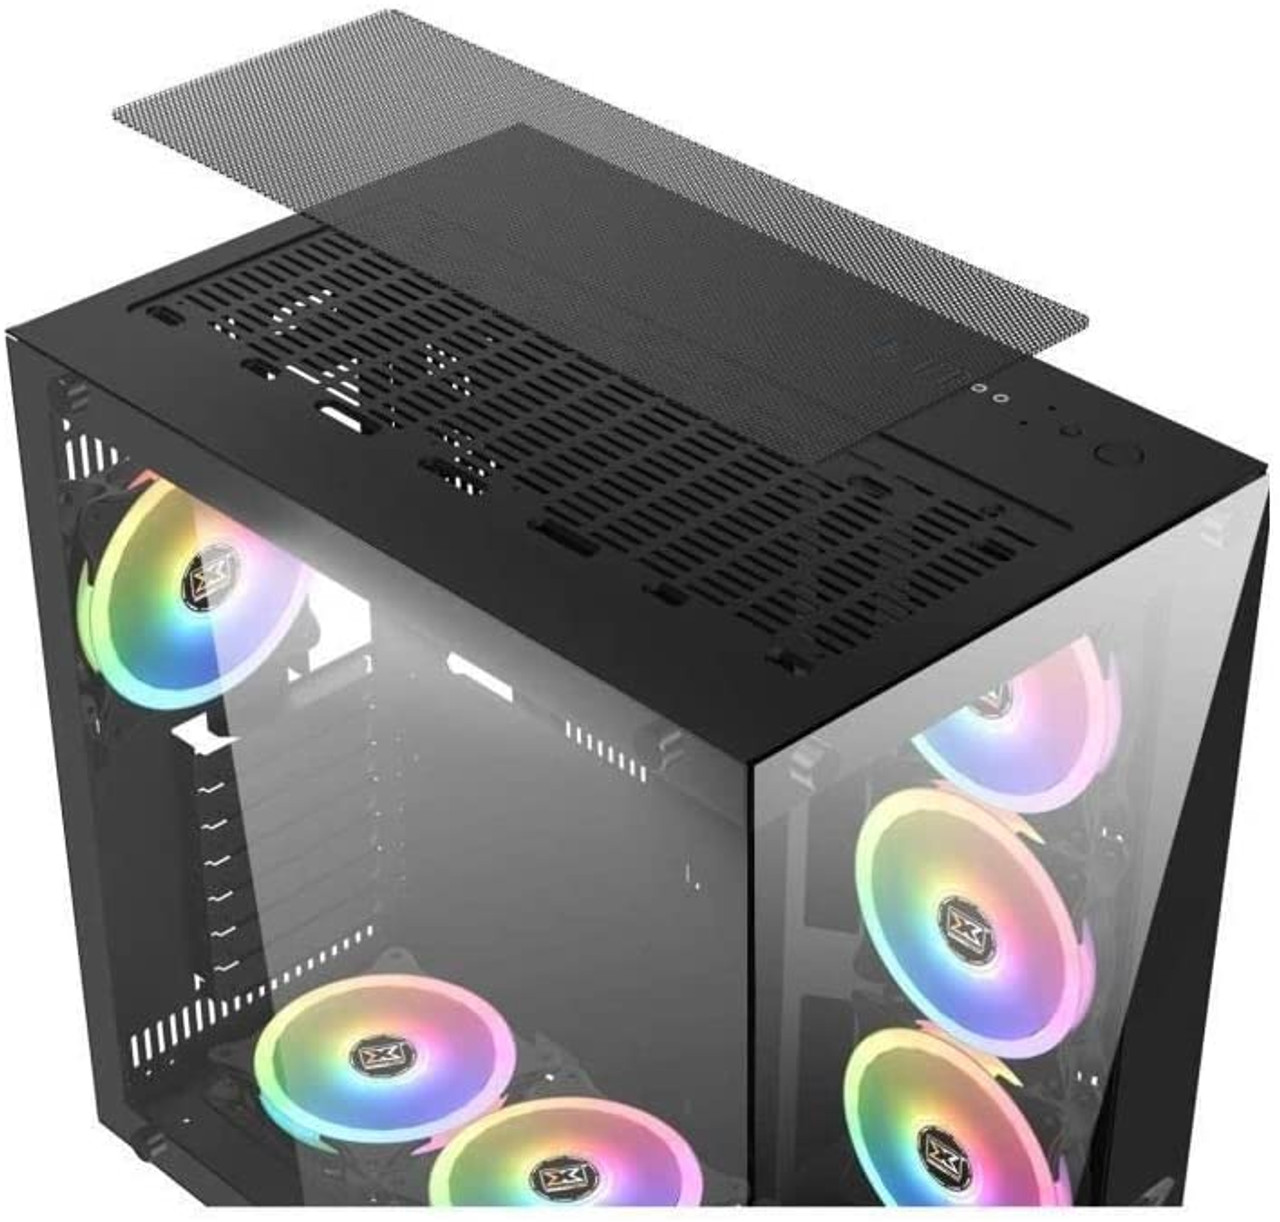 XIGMATEK Aquarius Plus is a Broad Mid-tower Case with Glasshouse